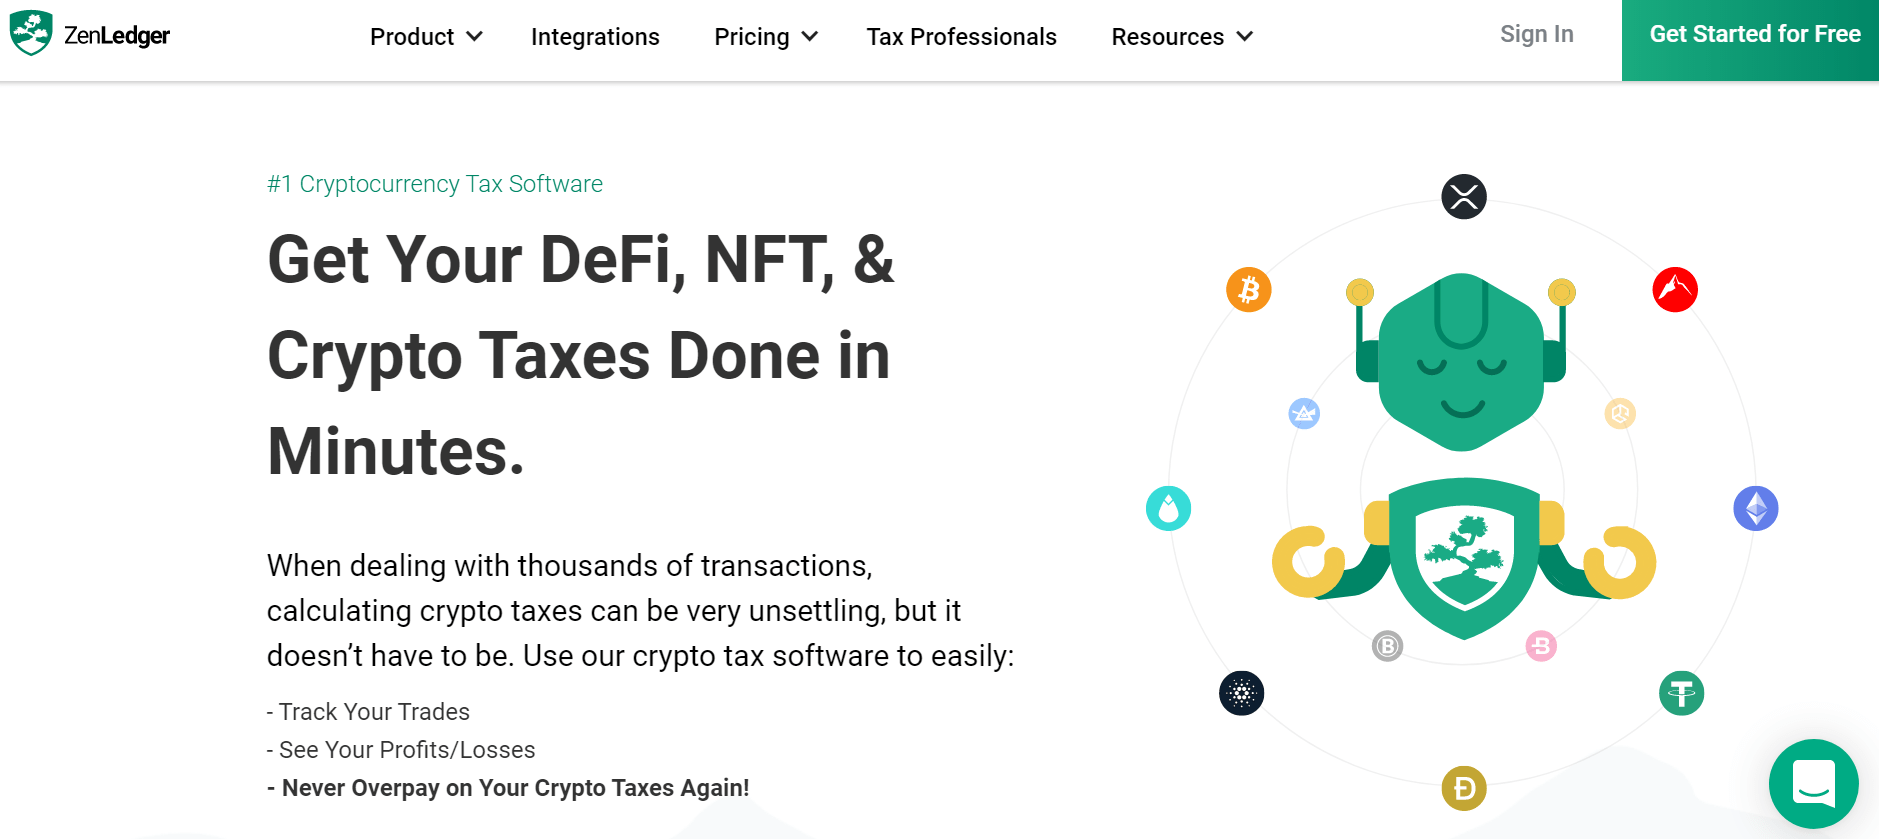 zenledger-a-crypto-tax-prep-software-company-raises-15m-in-round-backed-by-angellist